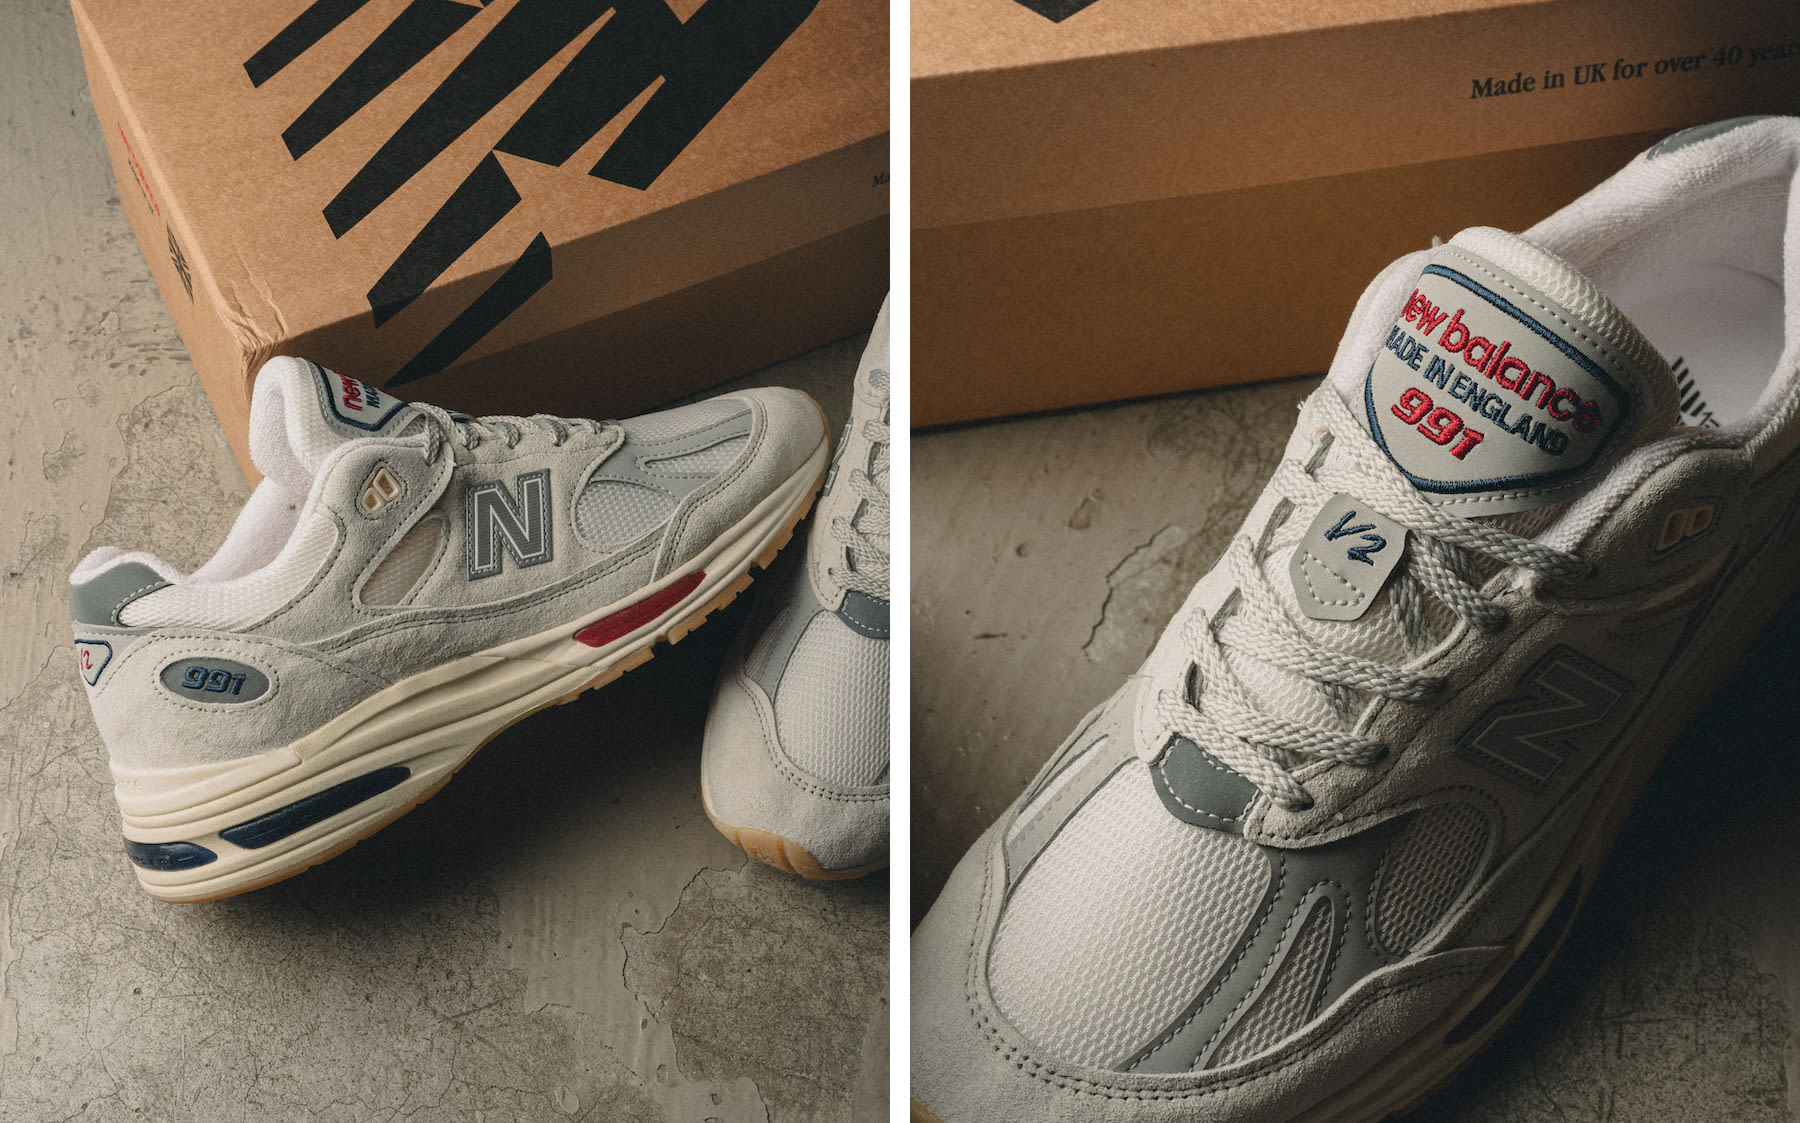 New Balance’s 991v2 ‘Made in UK’ Sneaker Takes On an Appropriate Red, White and Blue Colorway